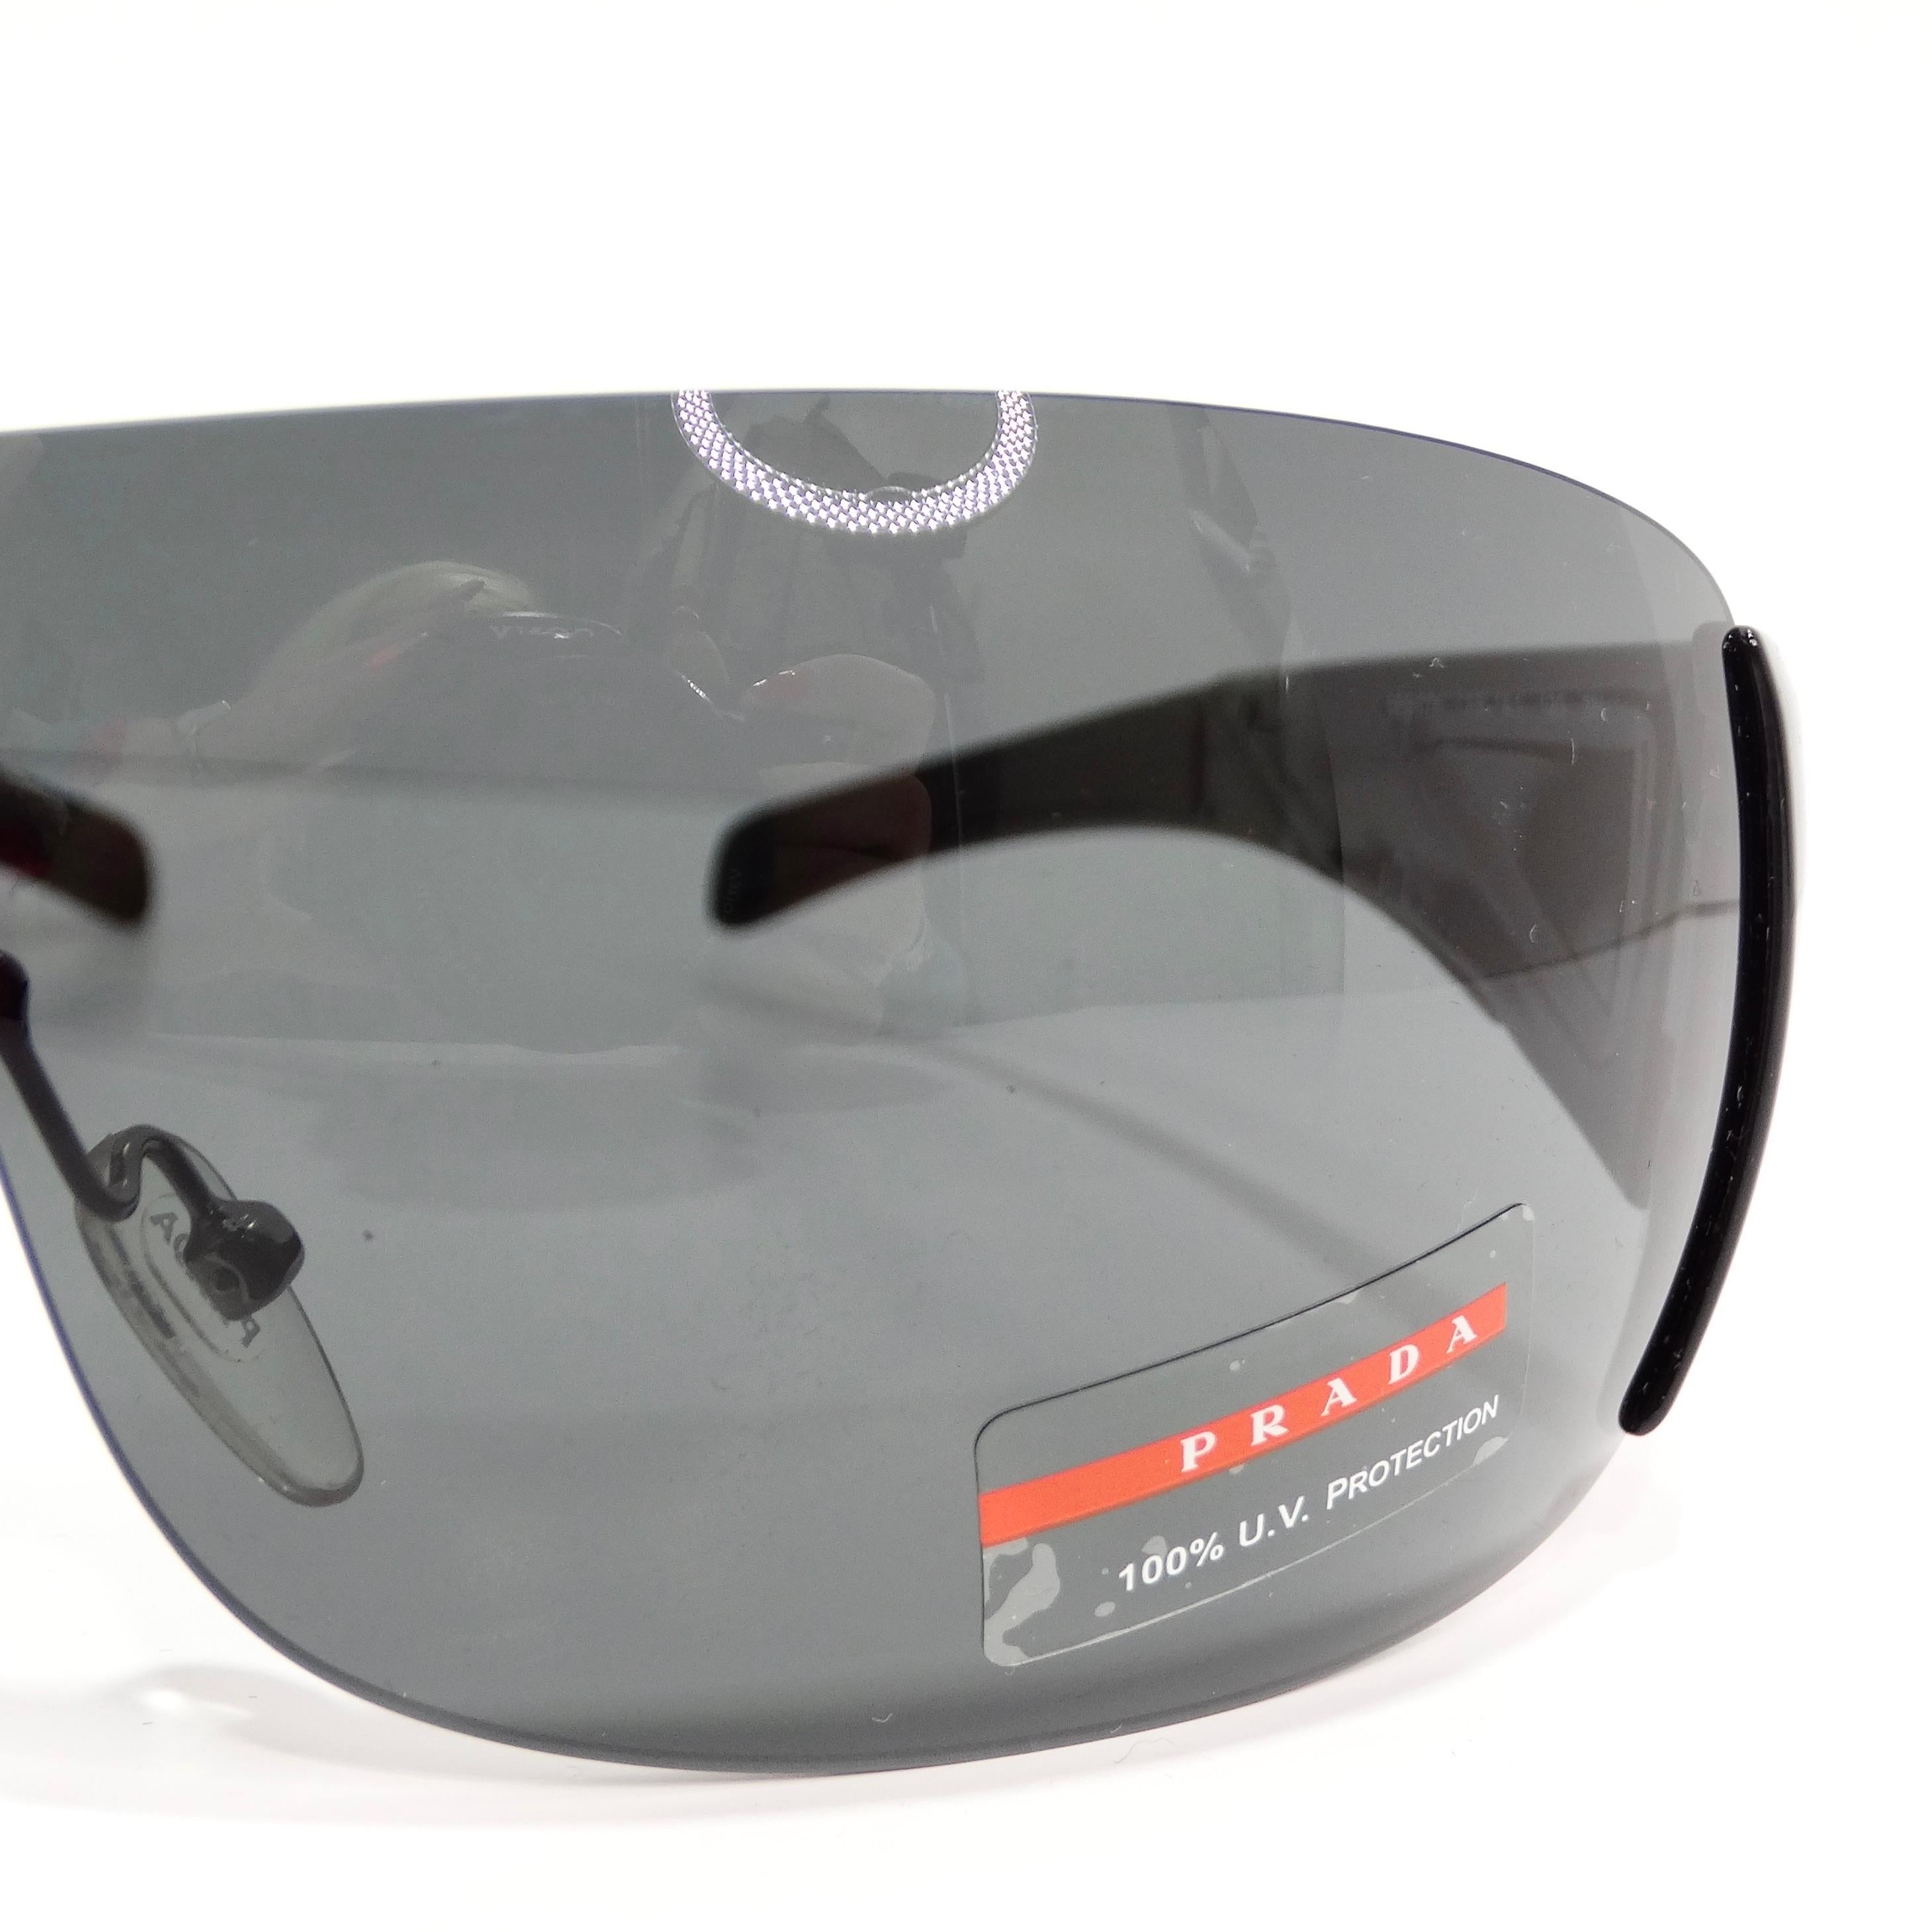 Embrace timeless sophistication with the Prada 1990s Black Shield Style Sunglasses, a classic shield design that effortlessly combines chic style with enduring elegance. These sunglasses feature a shield-style silhouette with black arms adorned with